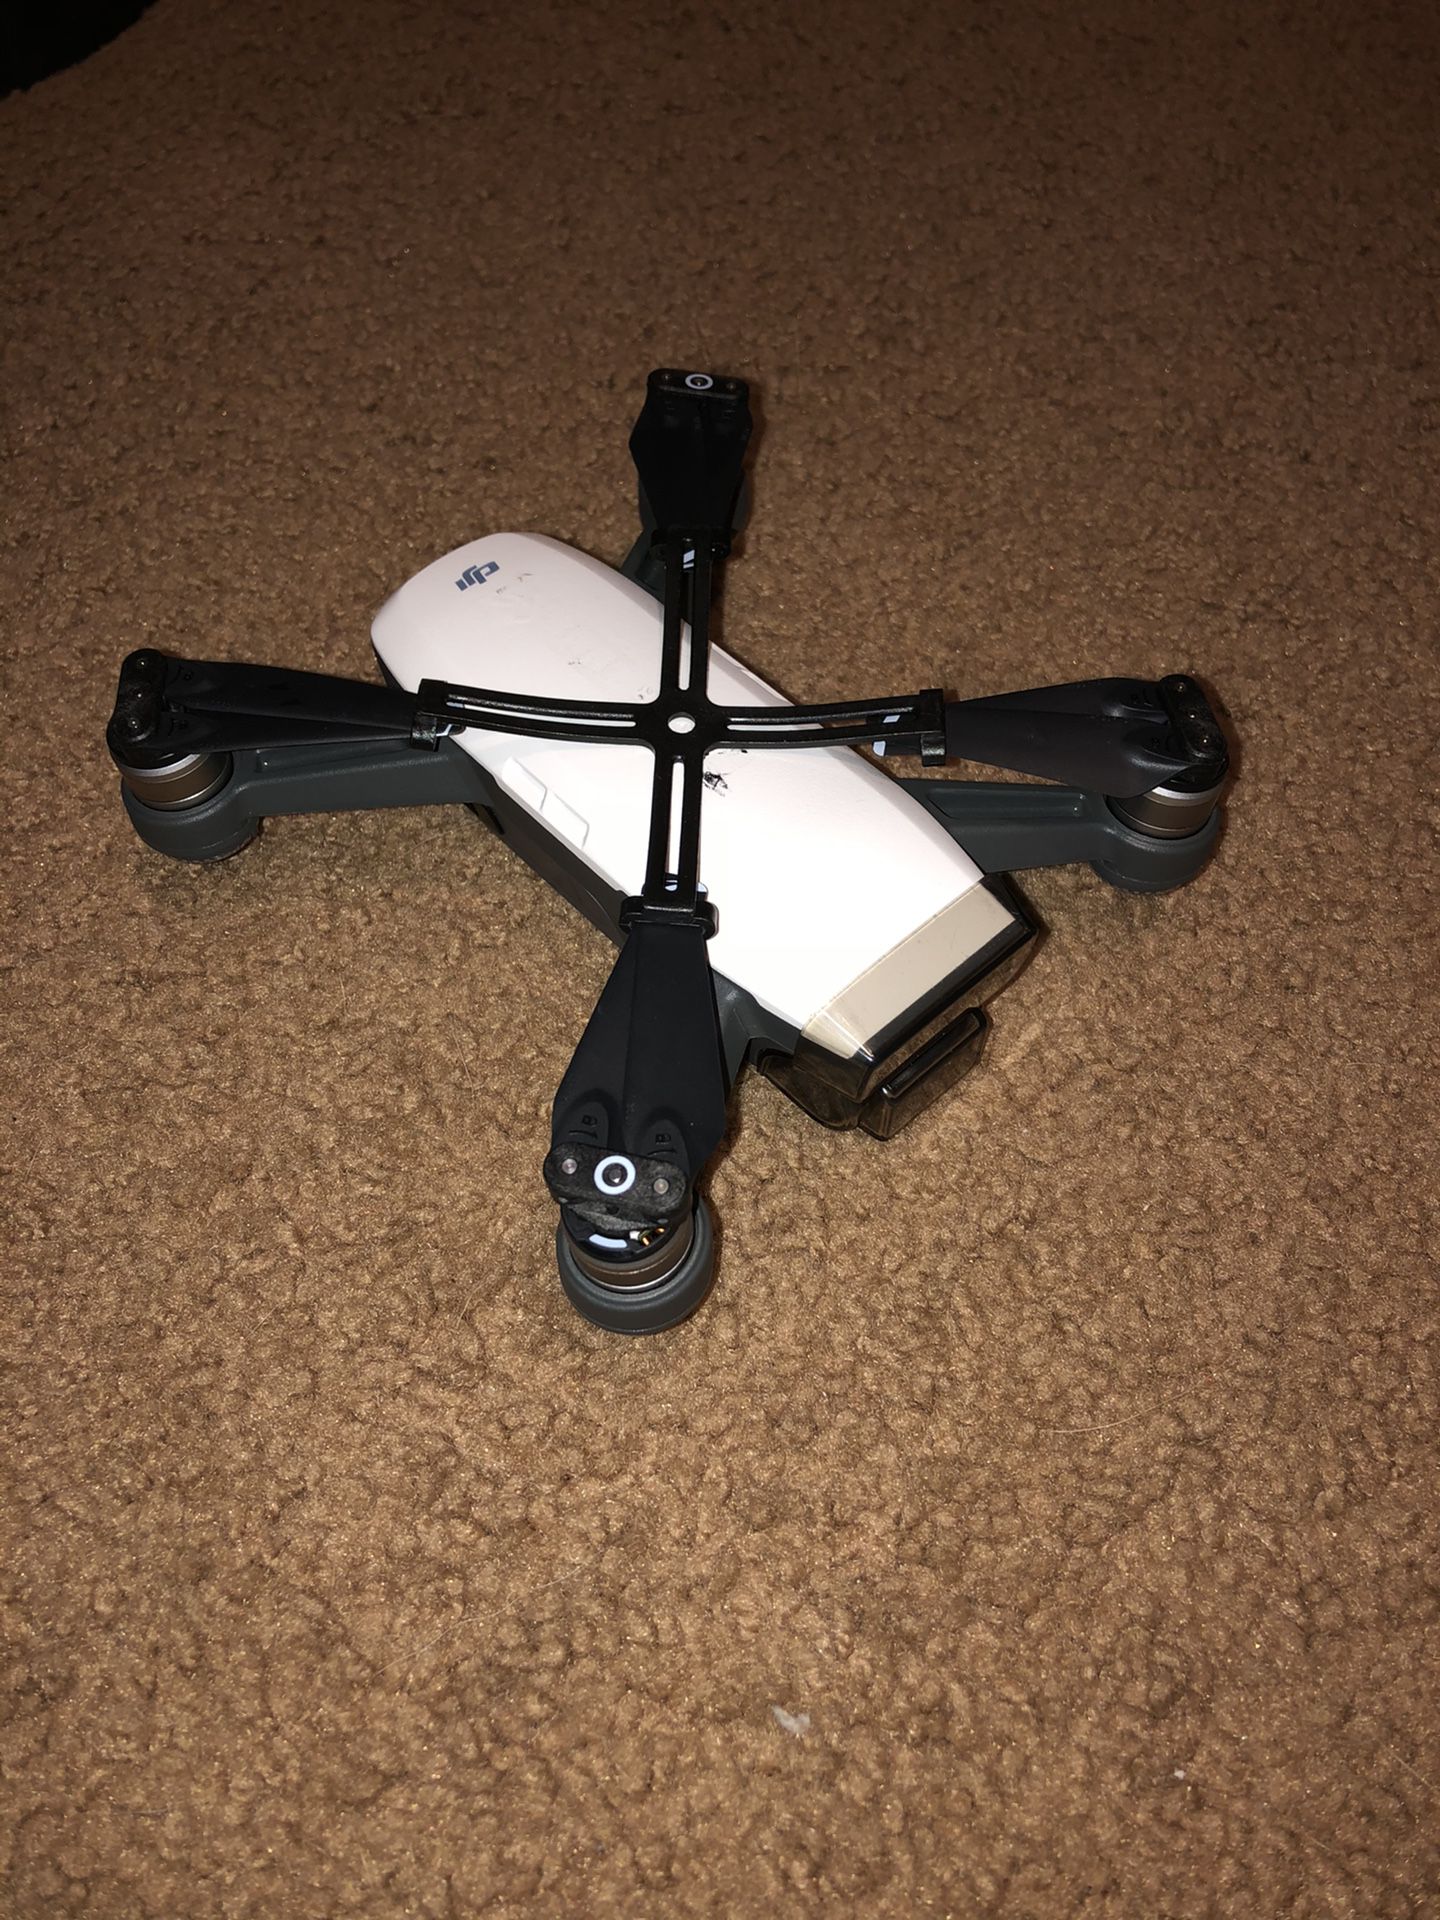 DJI Spark Camera drone with accessories